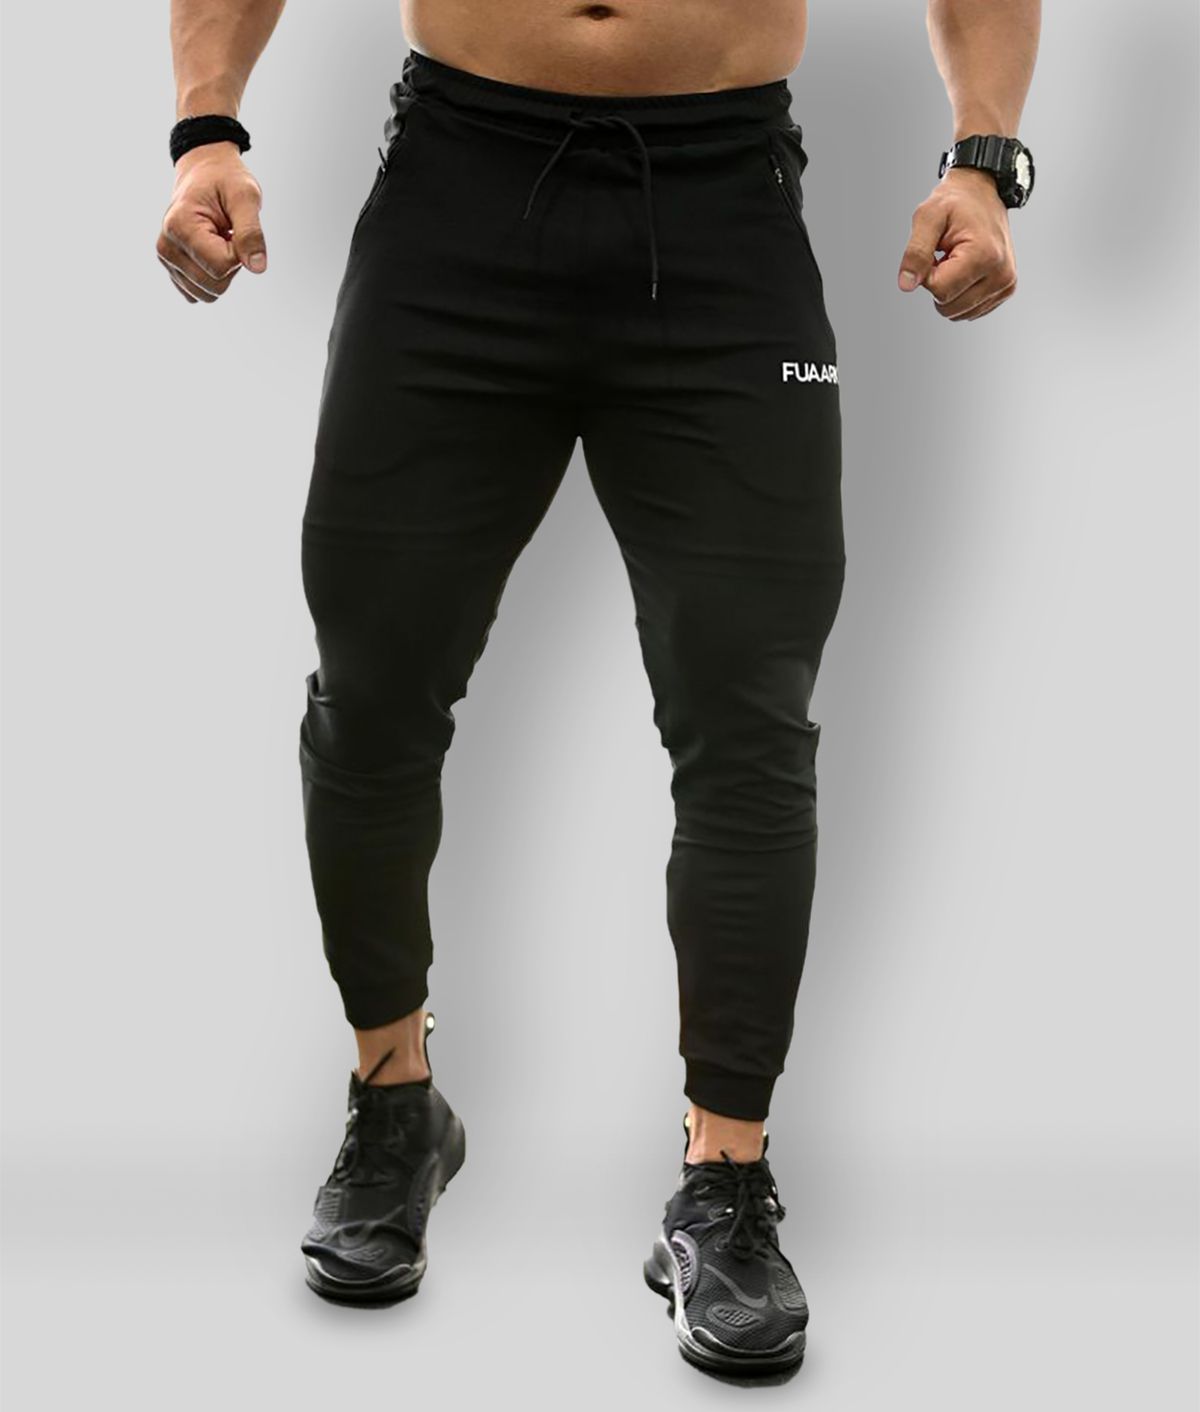     			Fuaark - Black Polyester Men's Sports Joggers ( Pack of 1 )